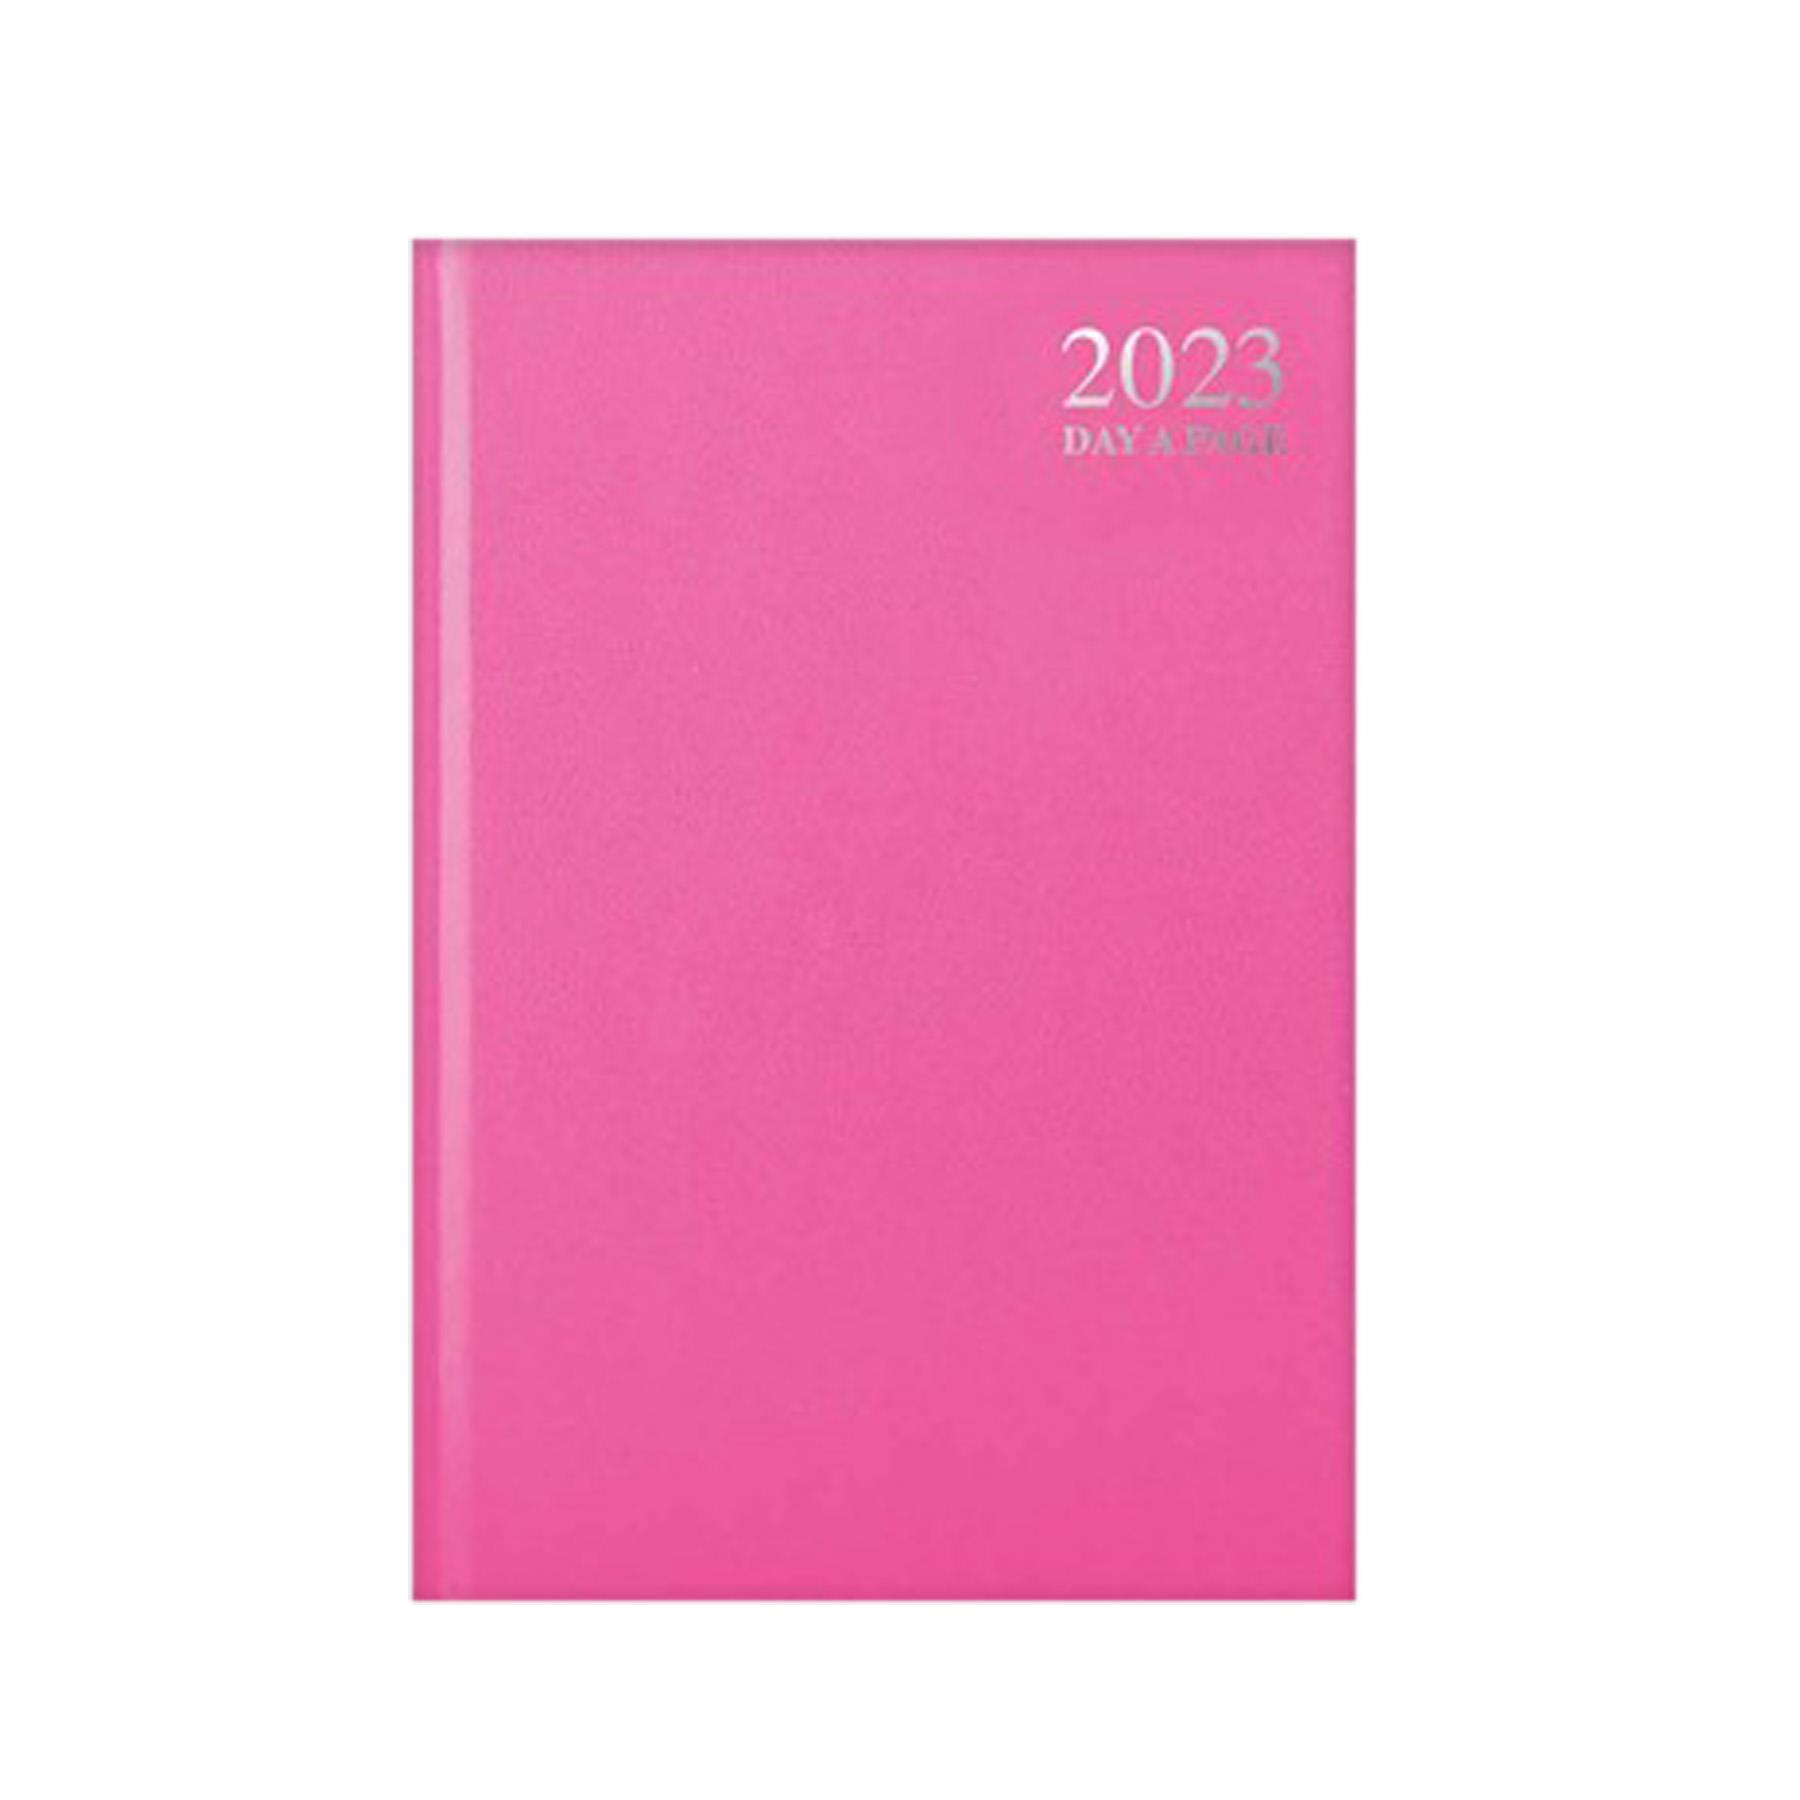 2023 A5 Hardback Day a Page Diary 3482 - Pink